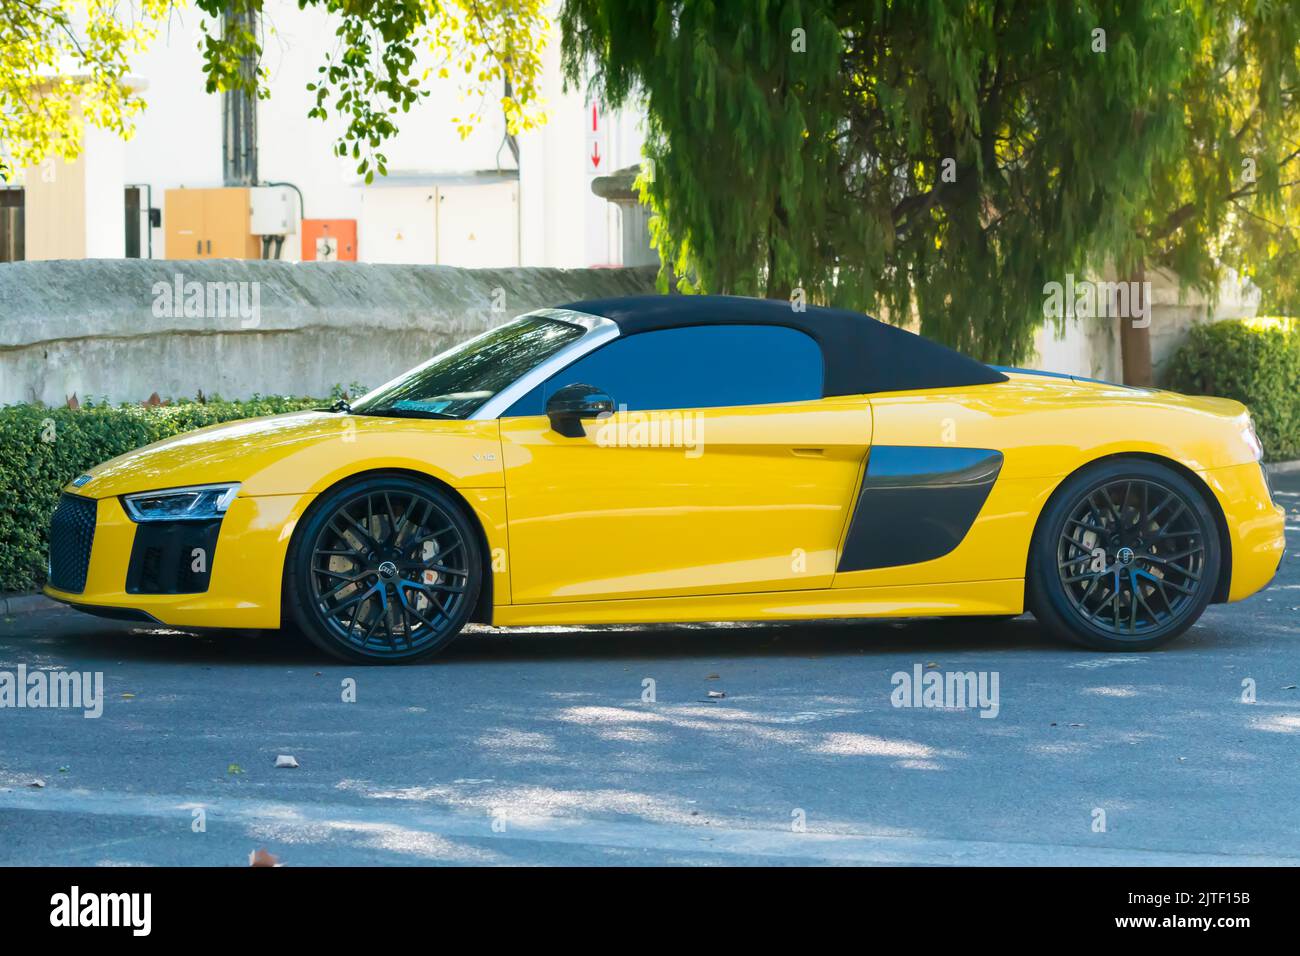 Audi R8 luxury and performance motor car, side on and yellow, parked in a road Stock Photo